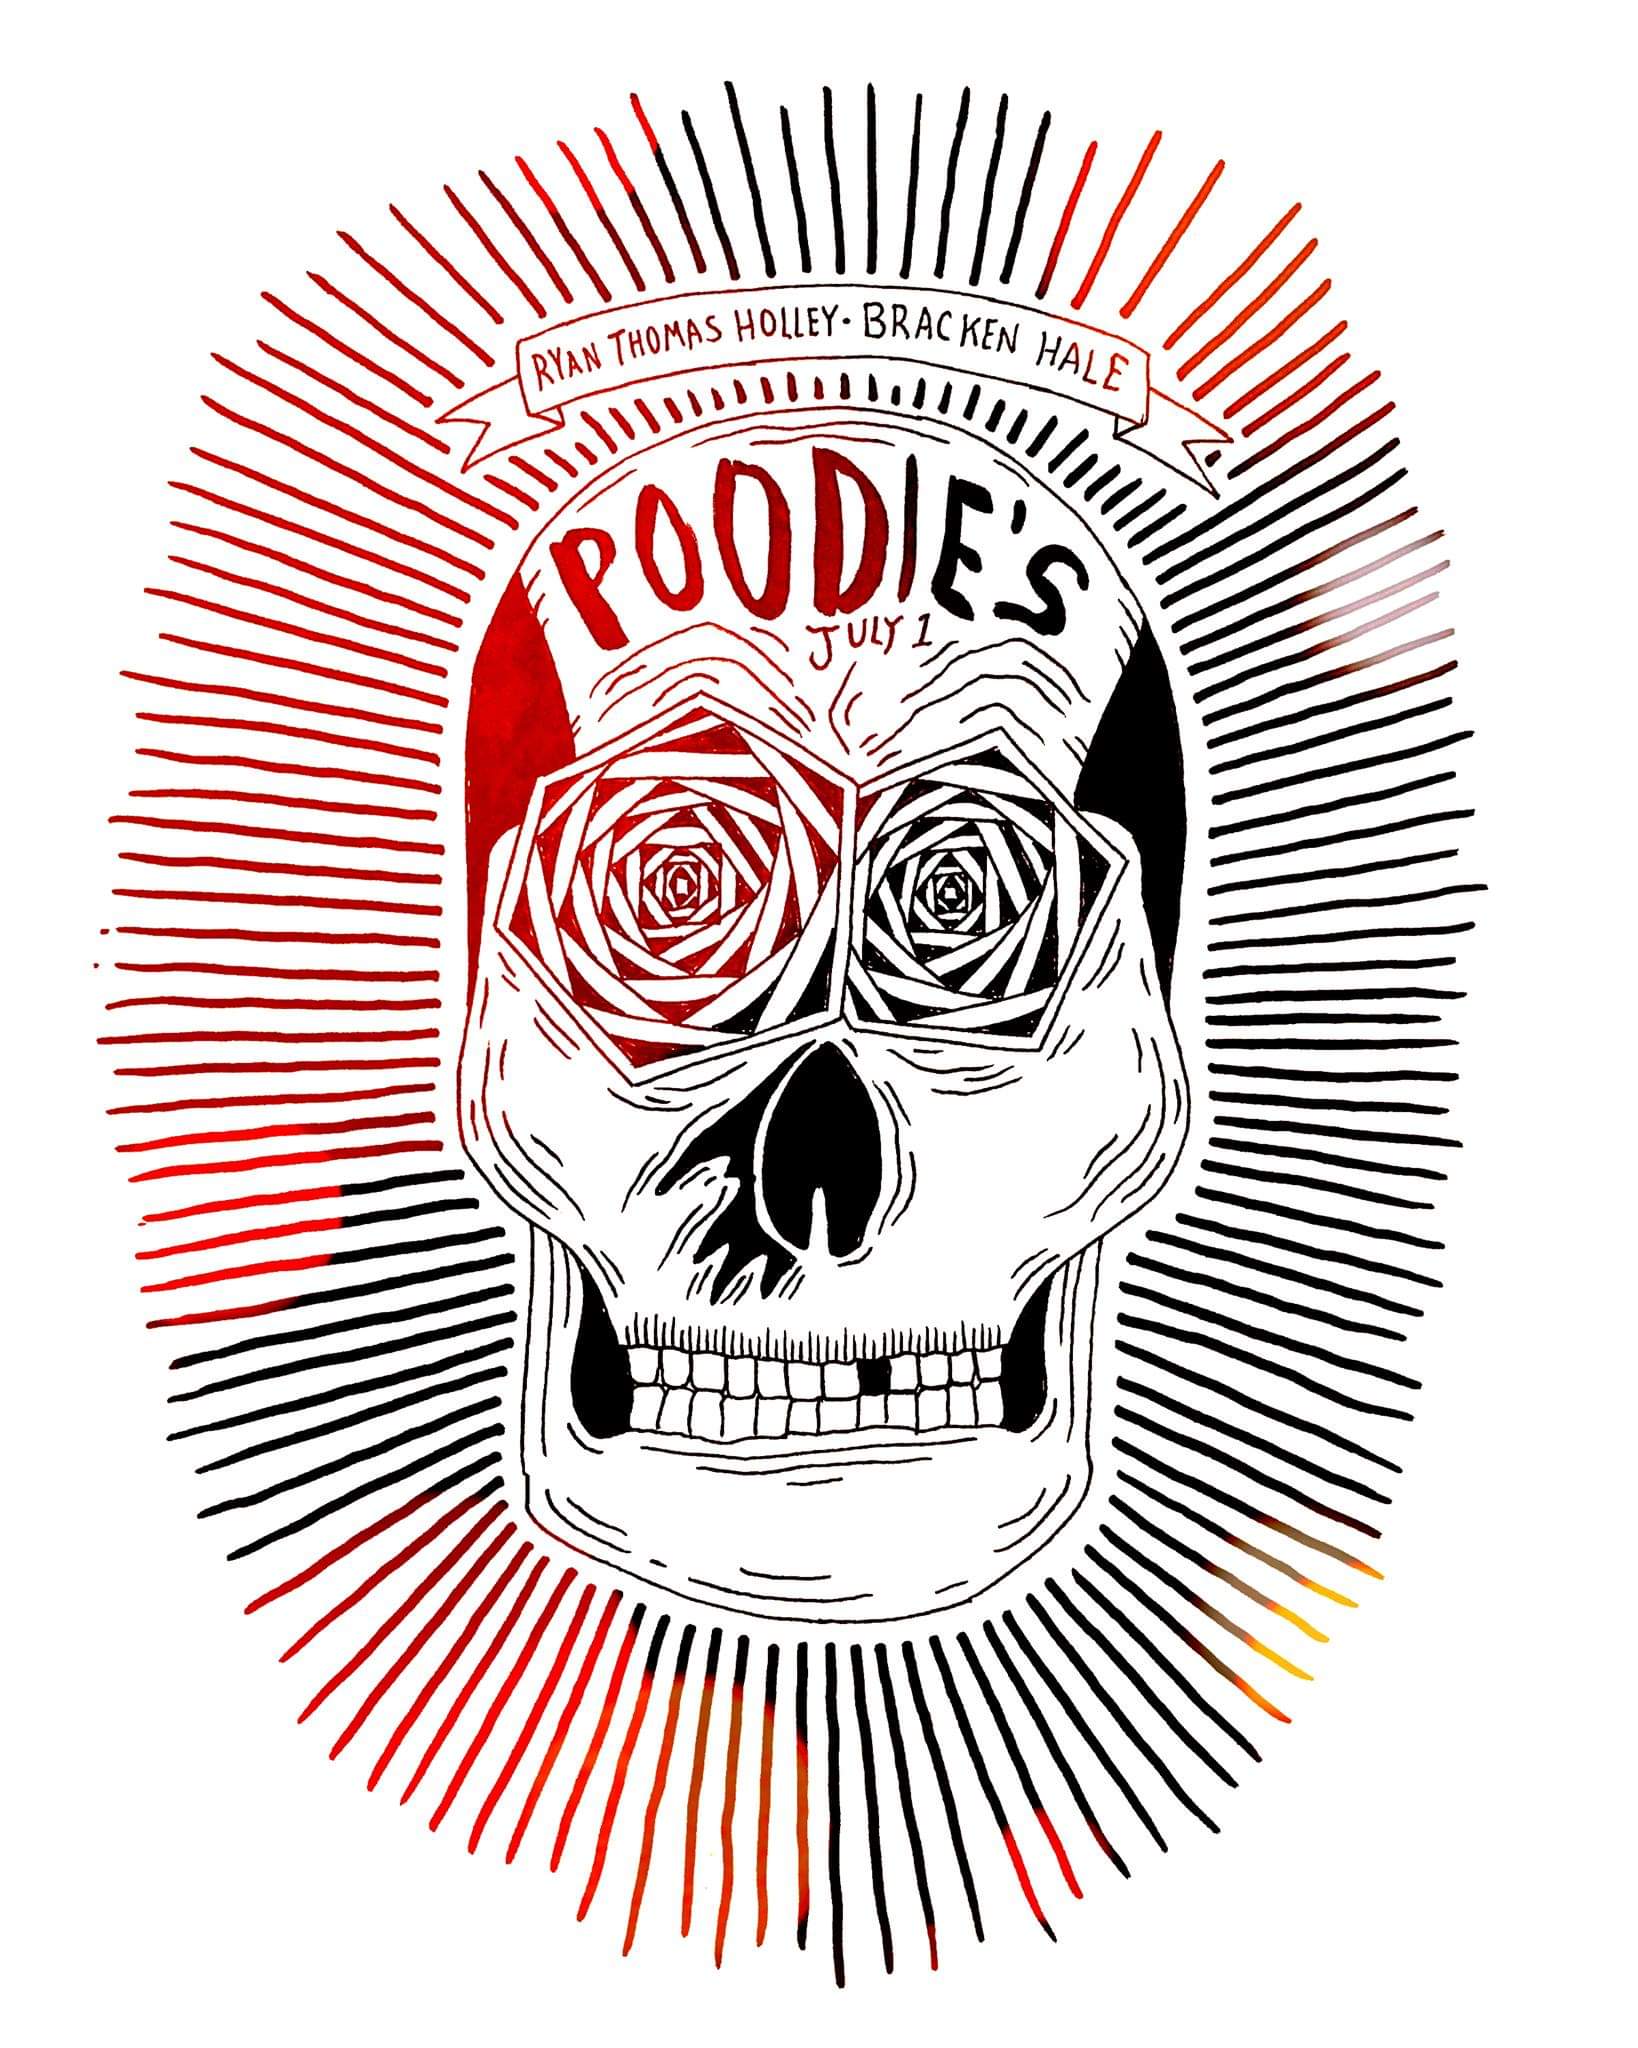 Poodie's Show Poster